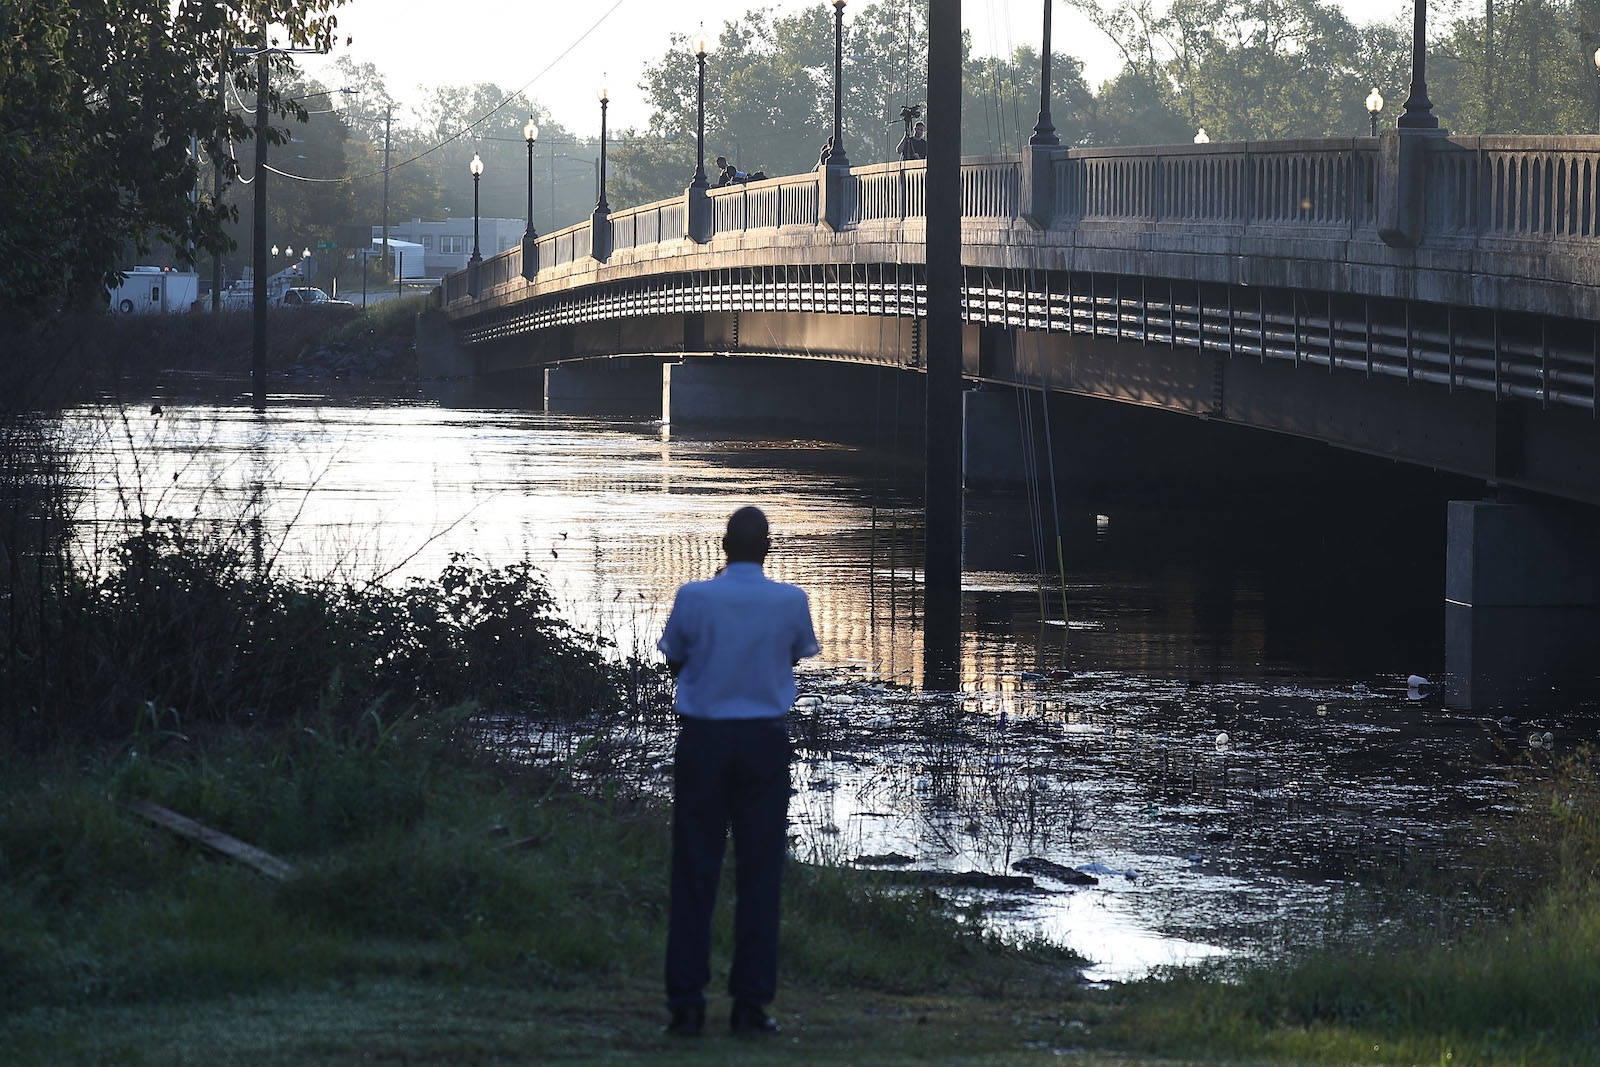 People look on at the Cape Fear river as it crests from the rains caused by Hurricane Florence on September 18, 2018.